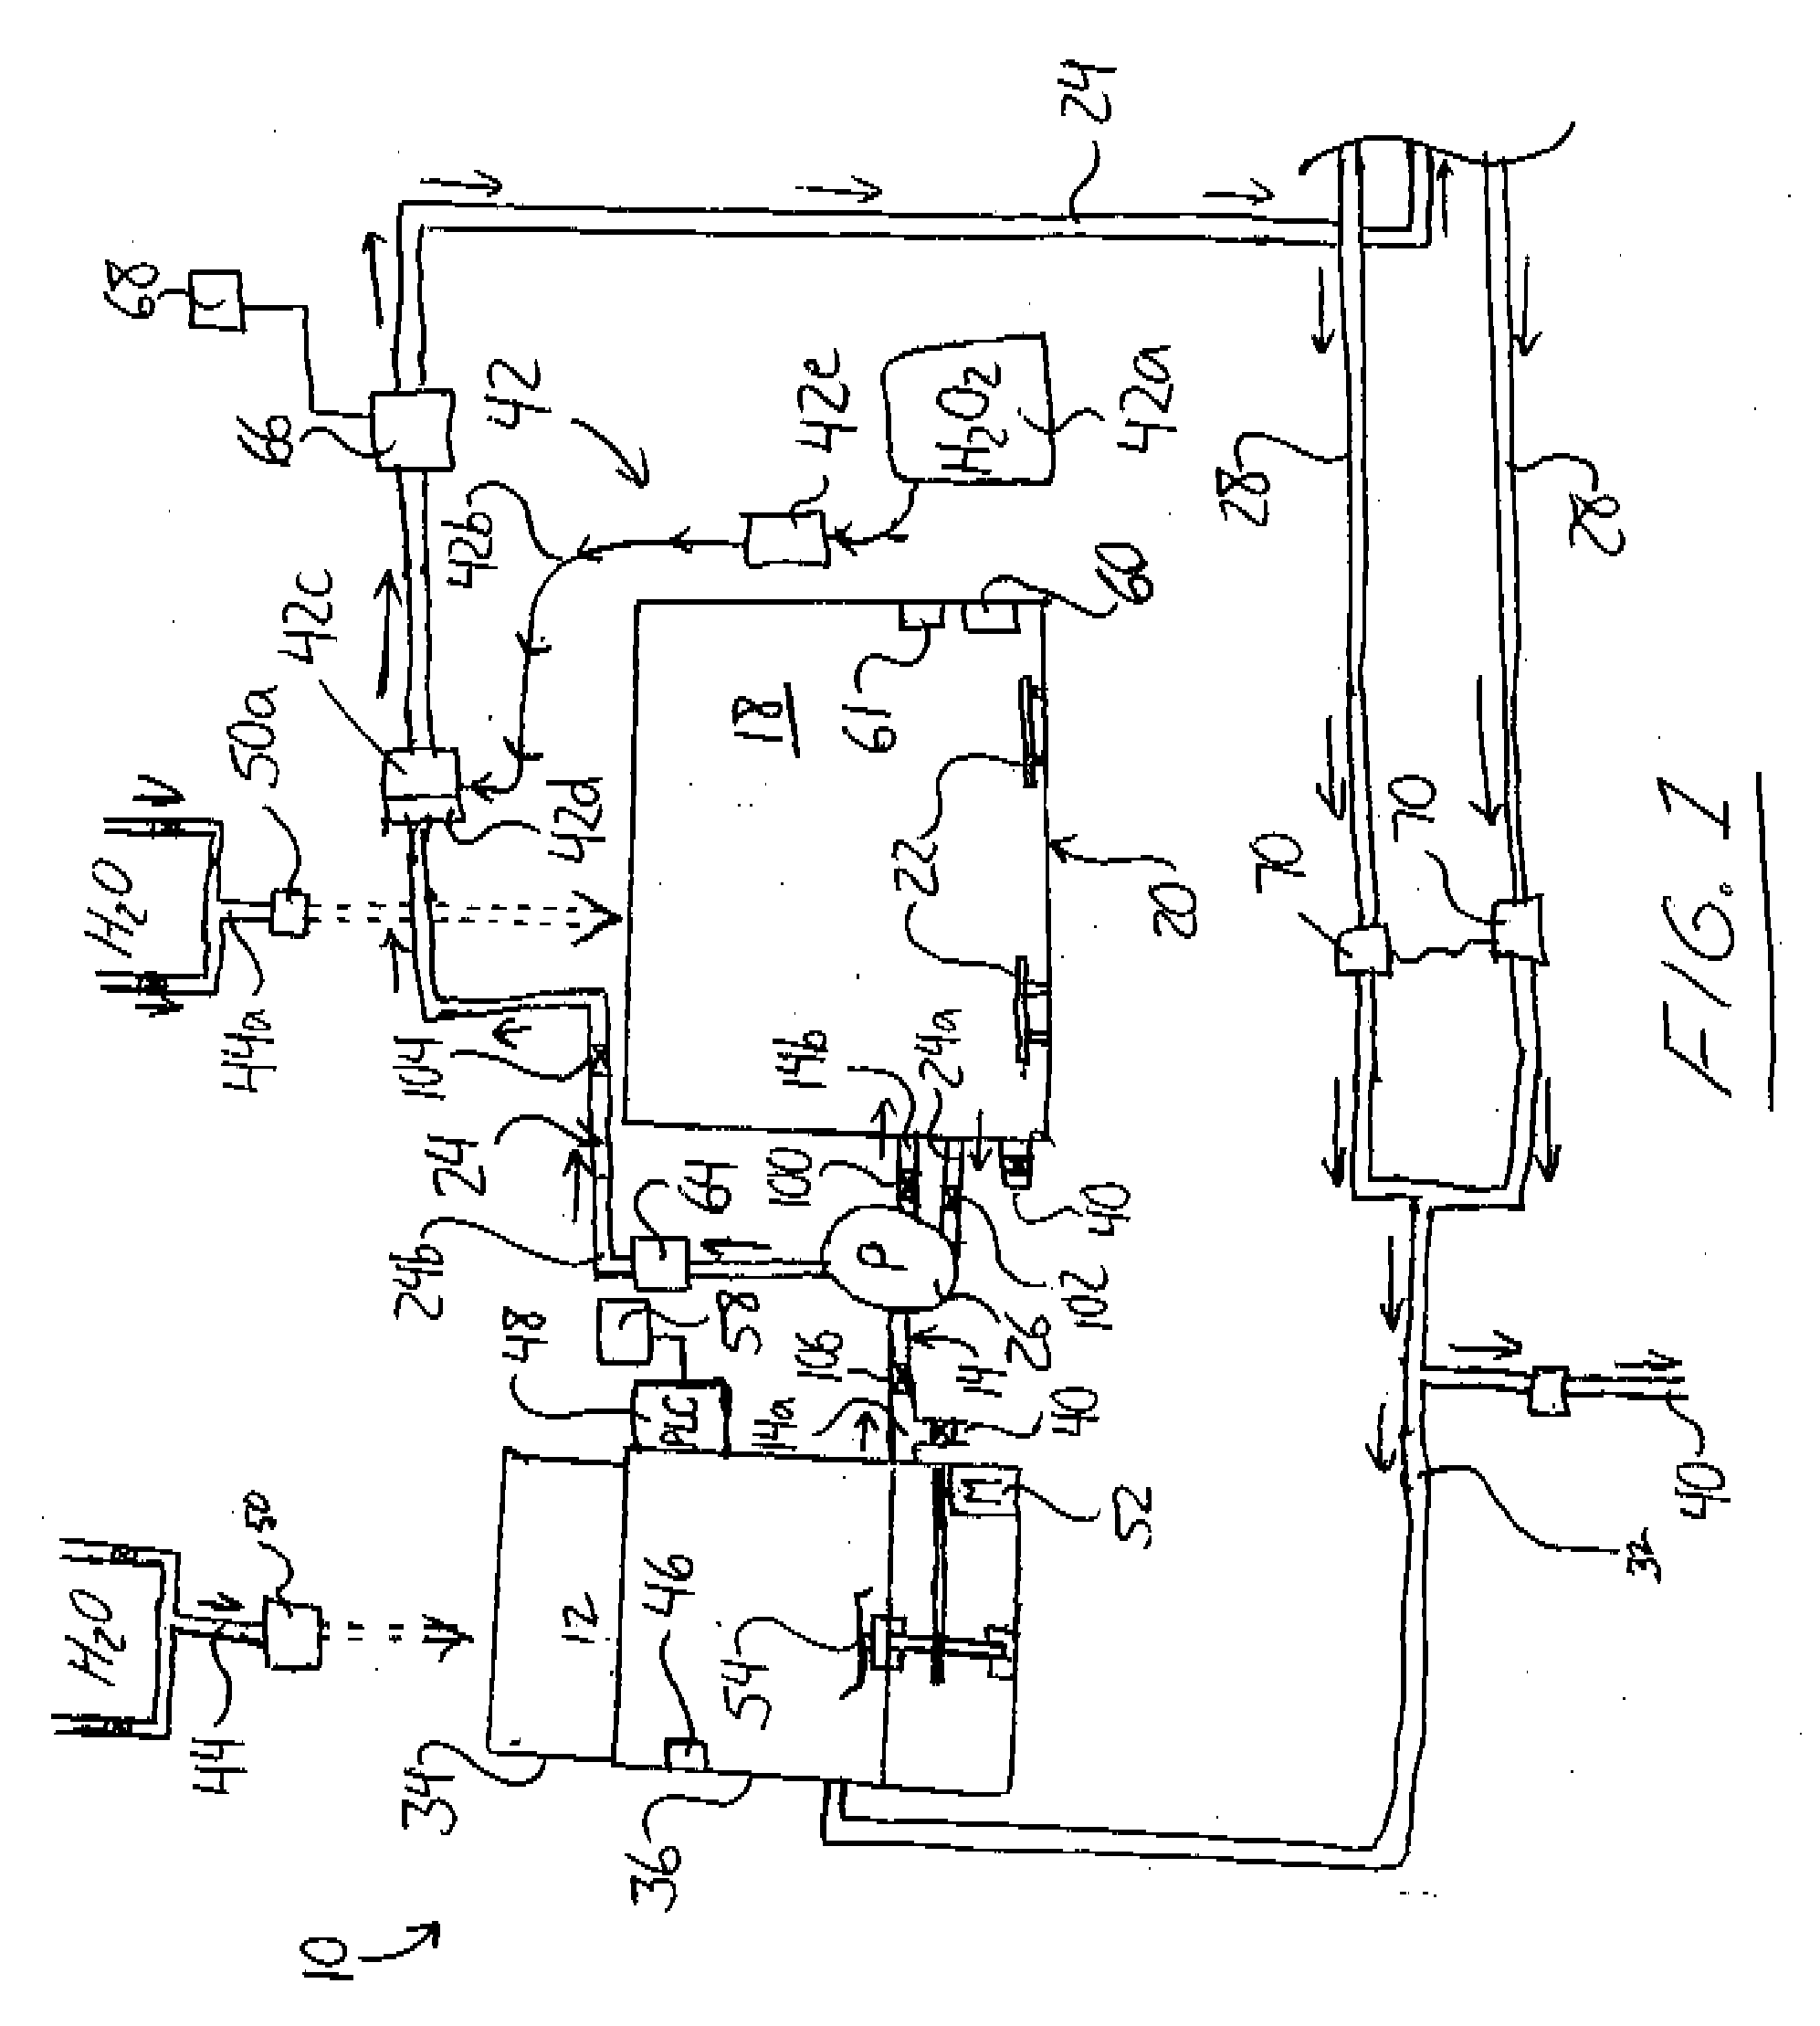 Methods and Systems for Supplying Liquid Feed to Livestock